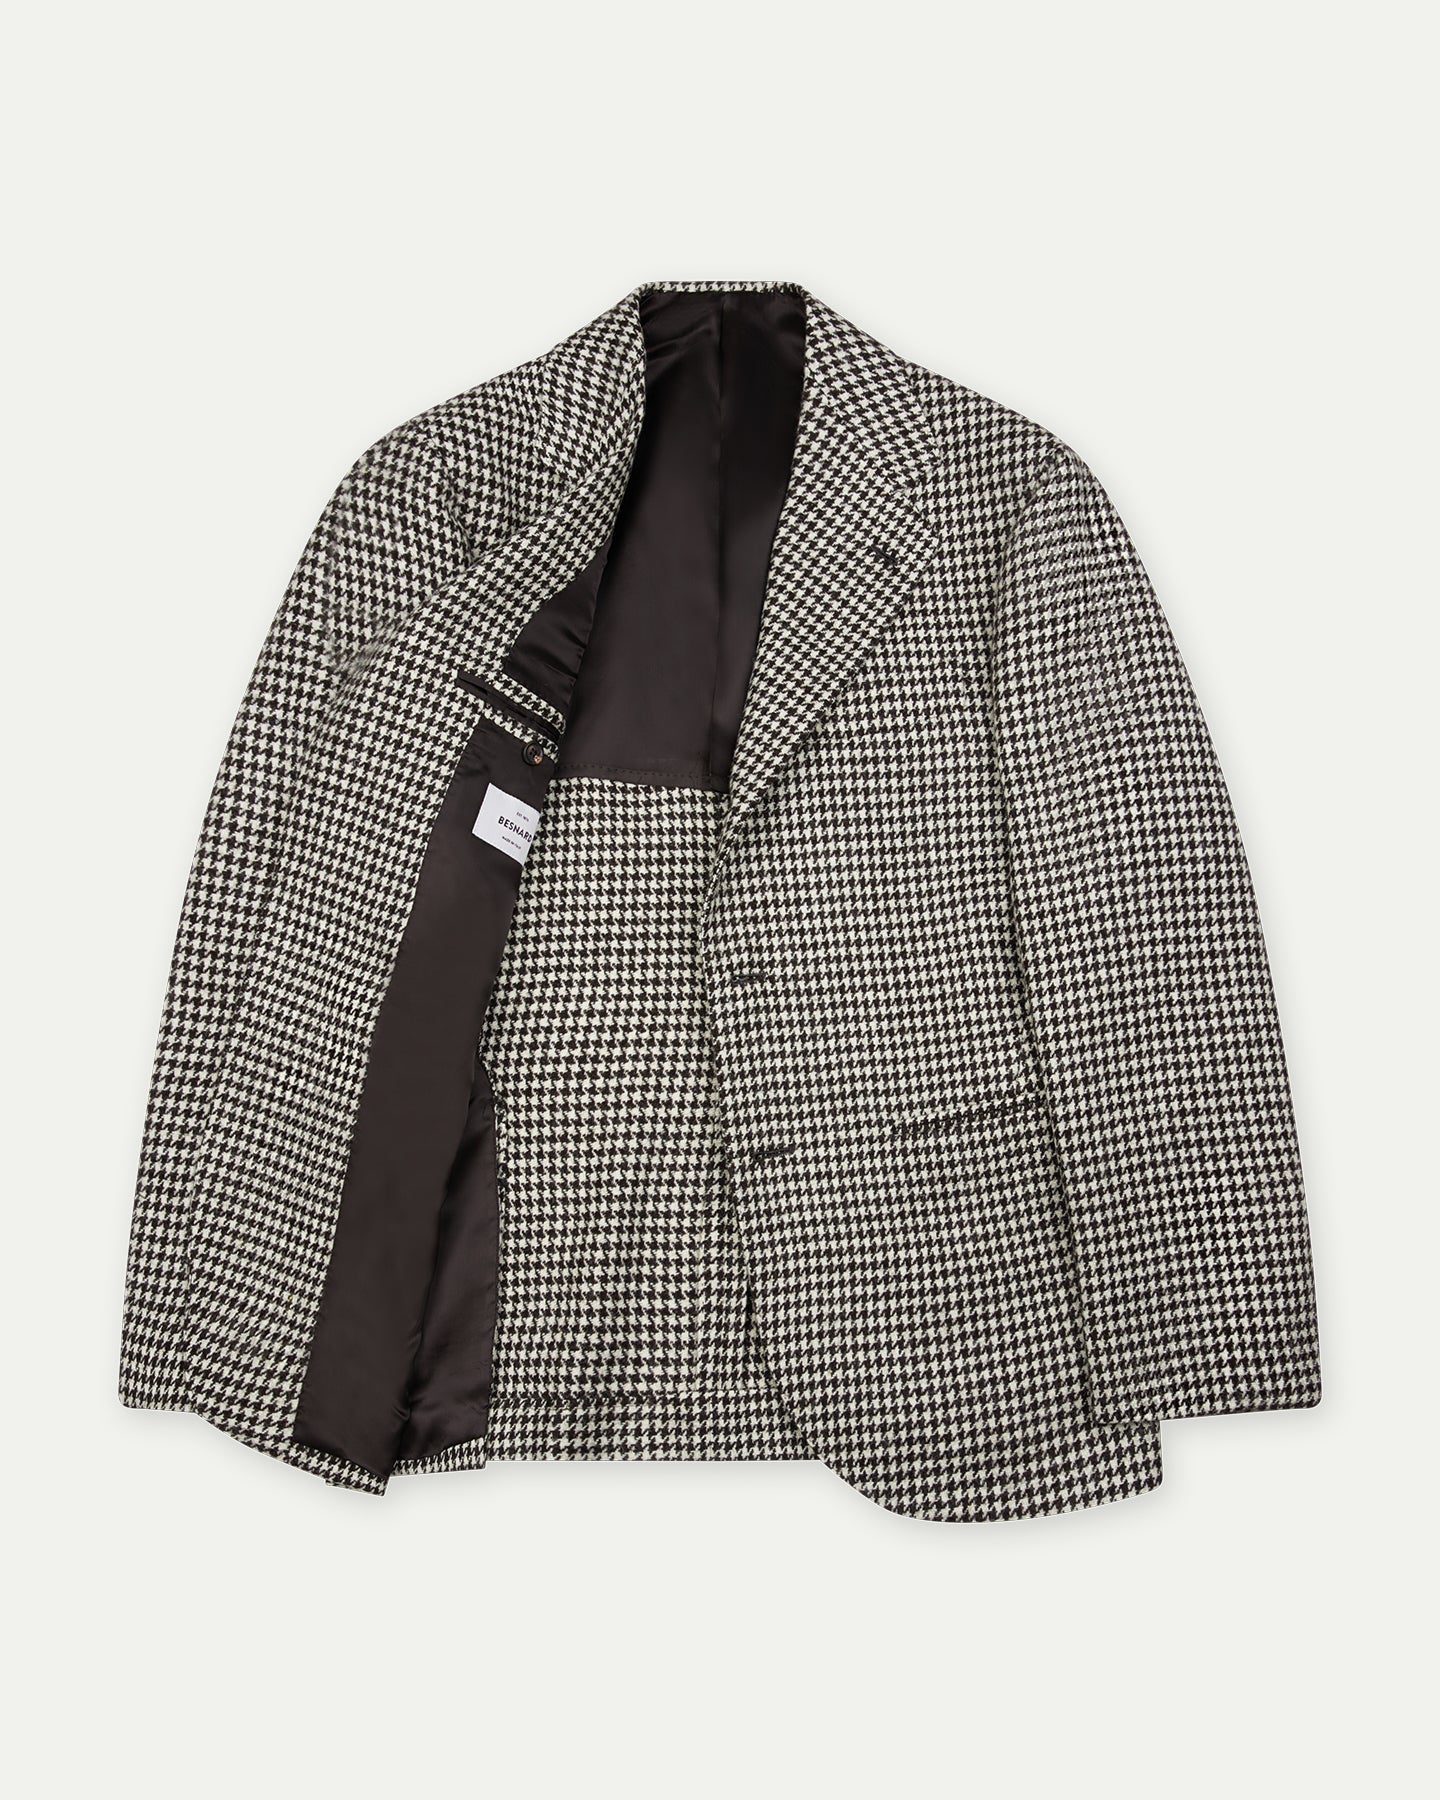 Made-To-Order Black / White Houndstooth Wool Sport Coat